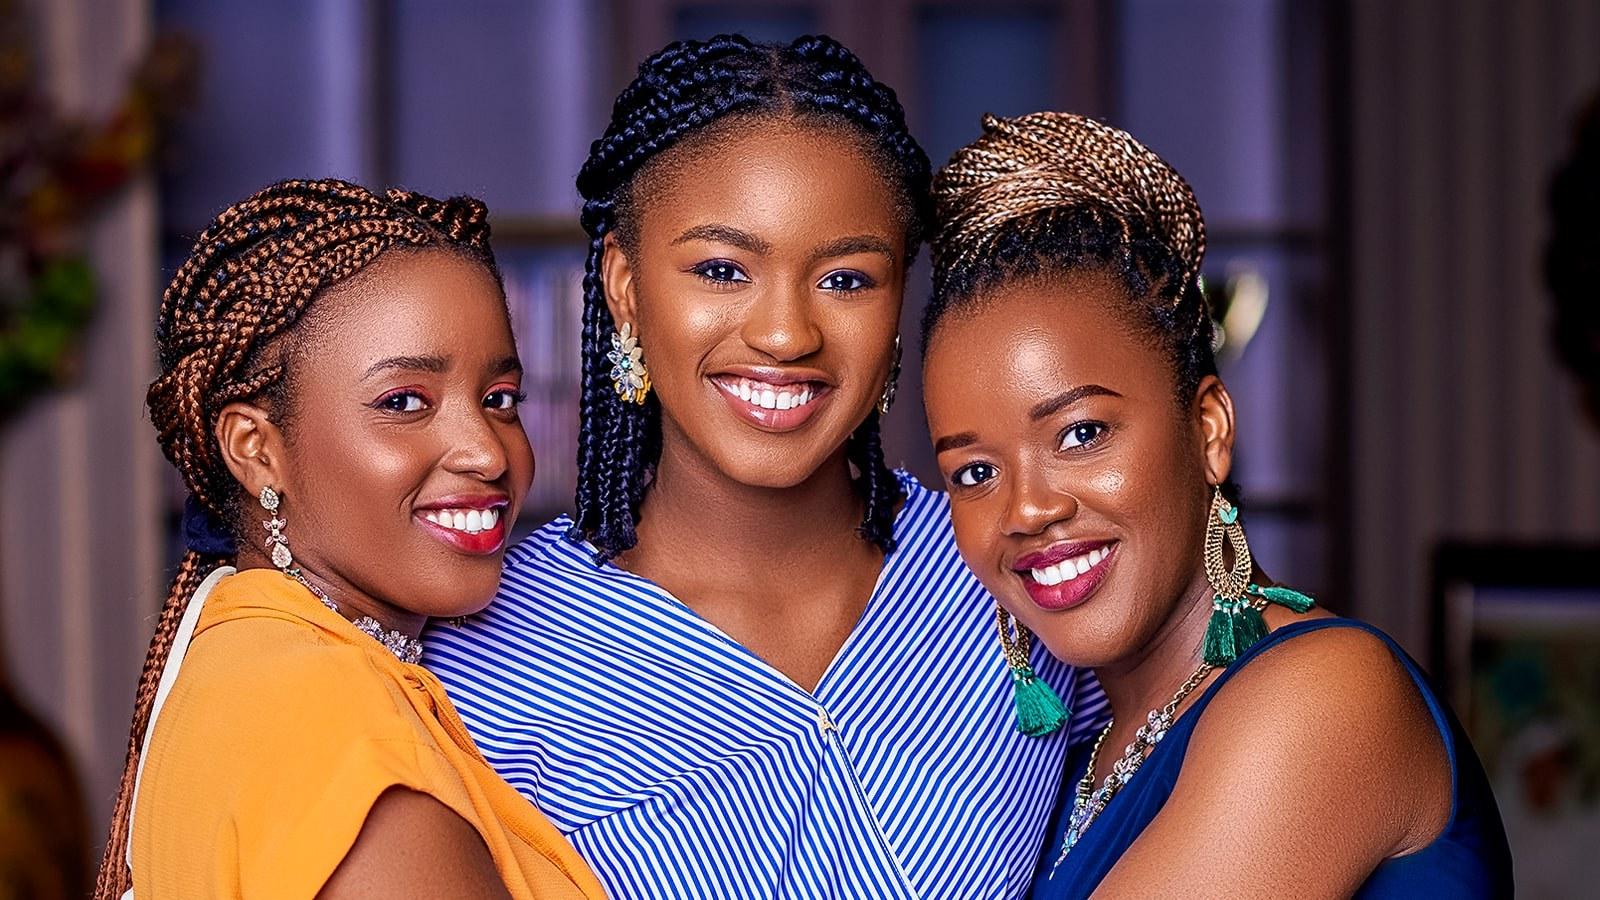 Three sisters, Jemima, Jeiel, and Jesimiel Damina, holding each other closely while posing with bright smiles.